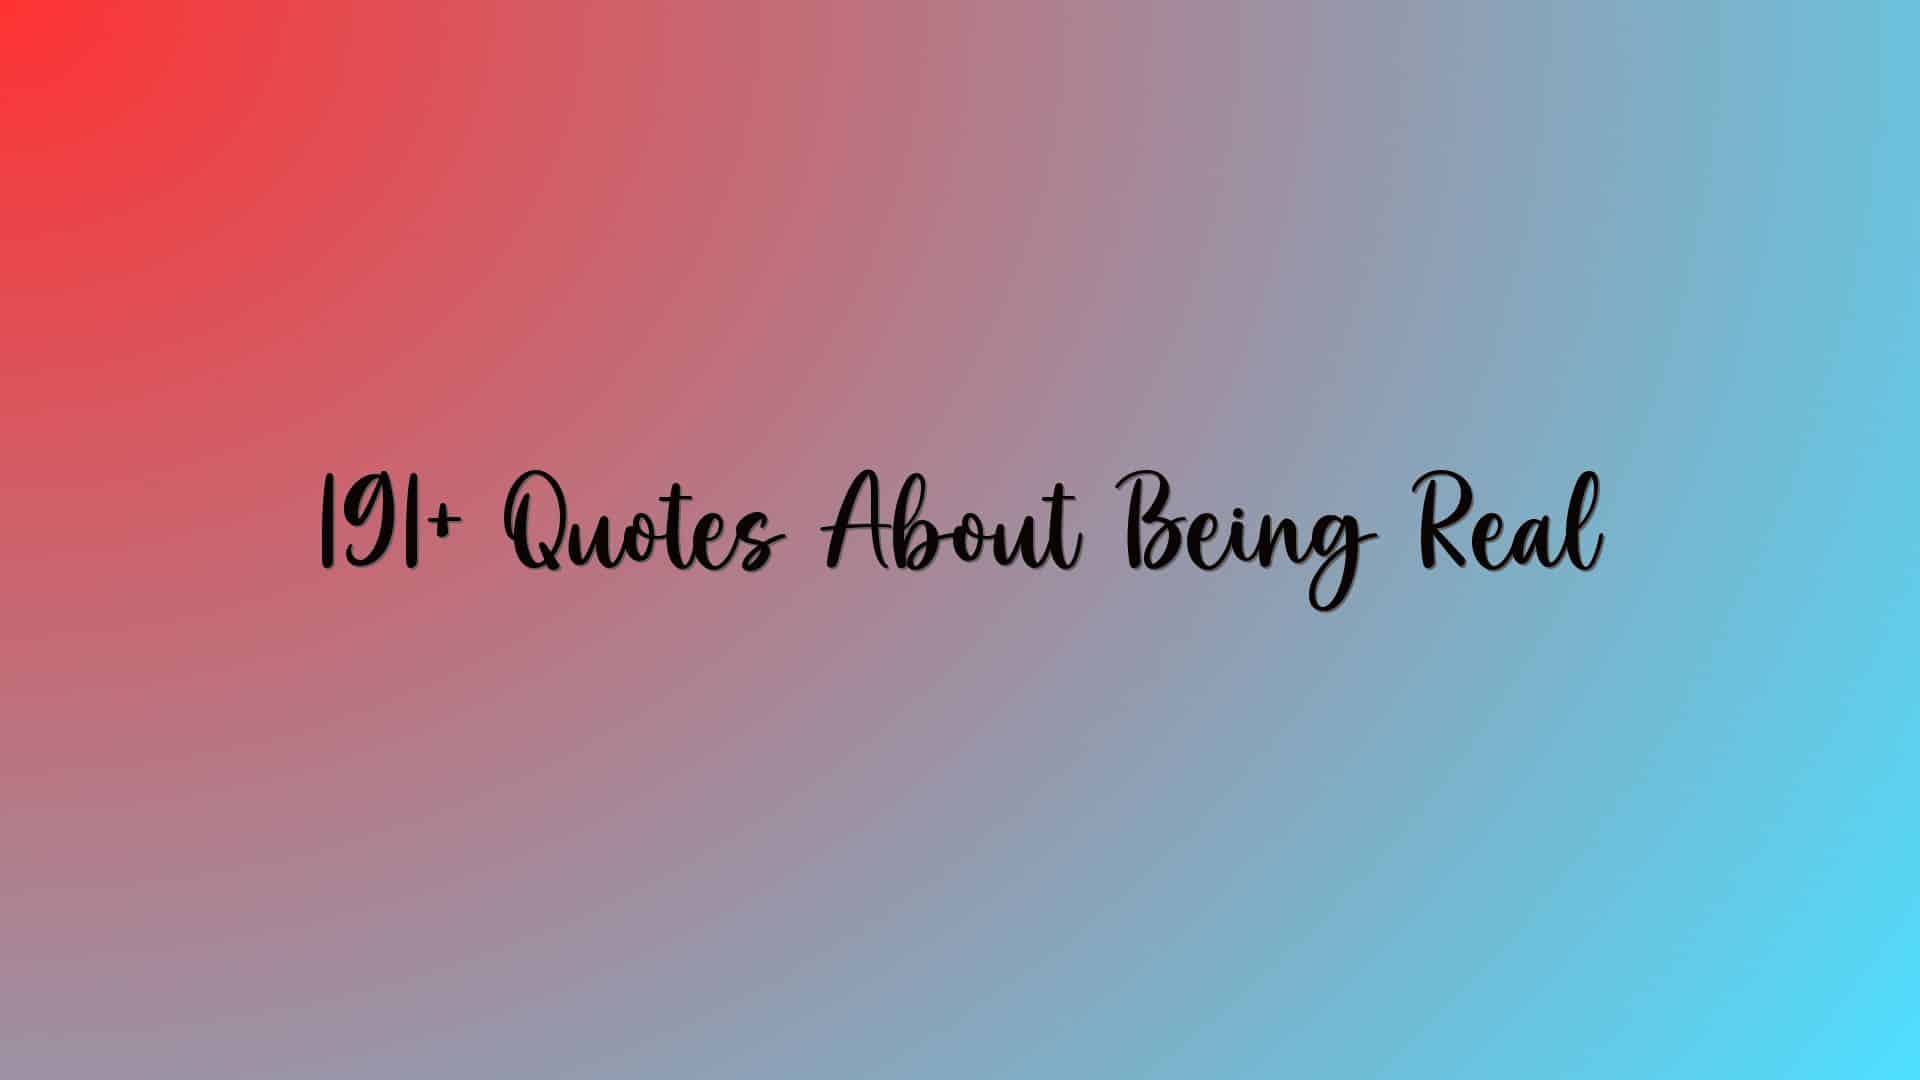 191+ Quotes About Being Real